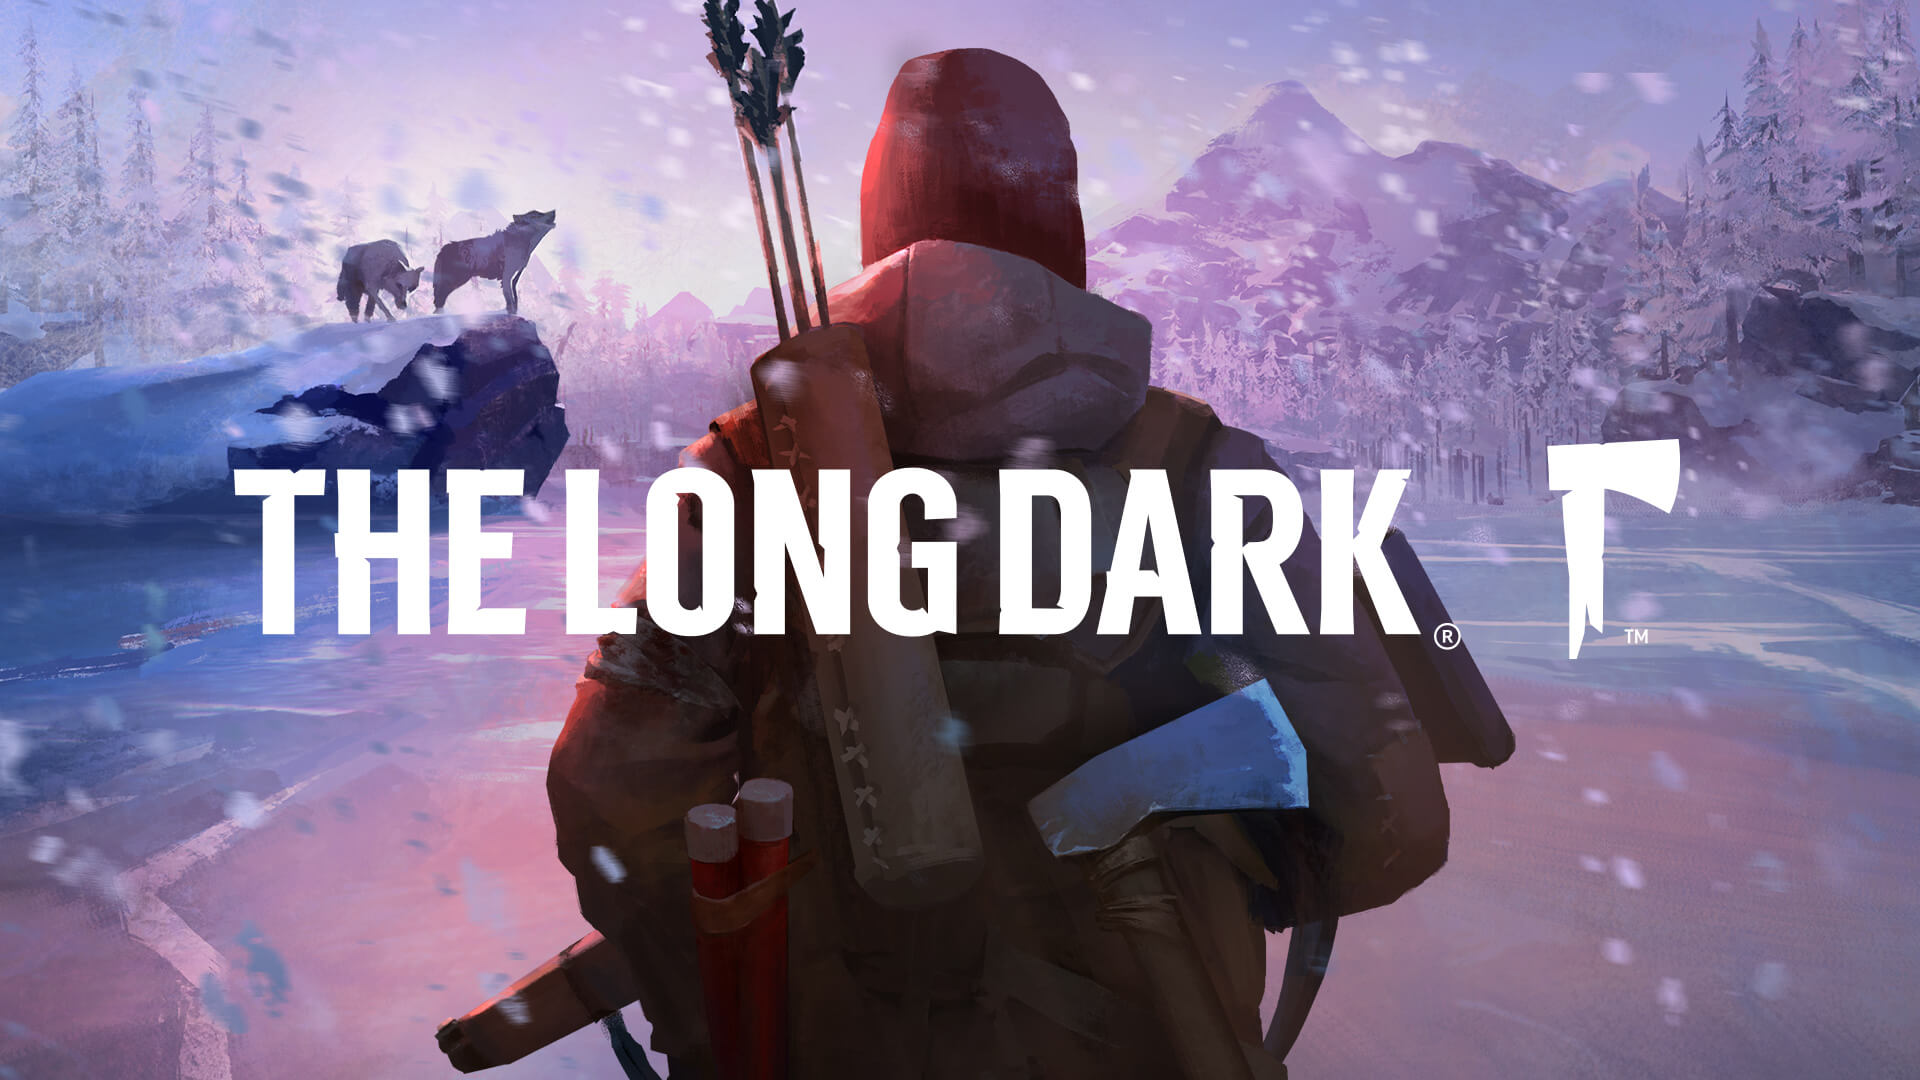 The Long Dark announced that it will release paid DLC for survival mode!